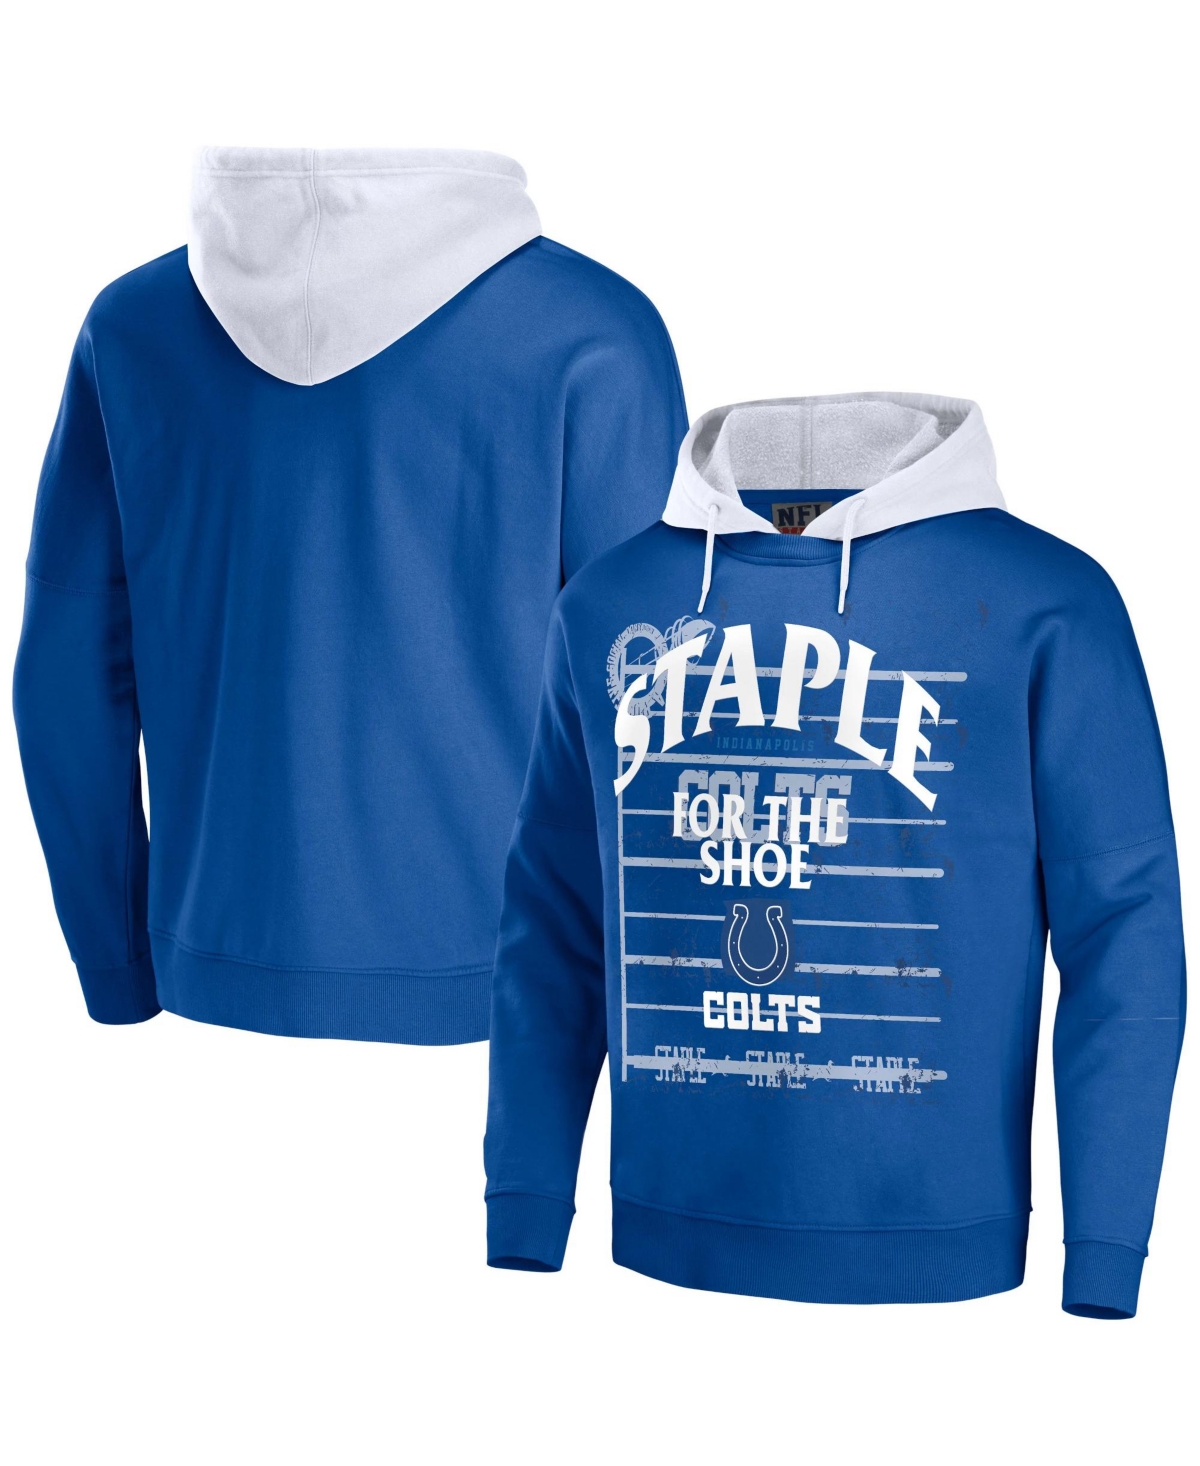 Shop Nfl Properties Men's Nfl X Staple Blue Indianapolis Colts Oversized Gridiron Vintage-like Wash Pullover Hoodie